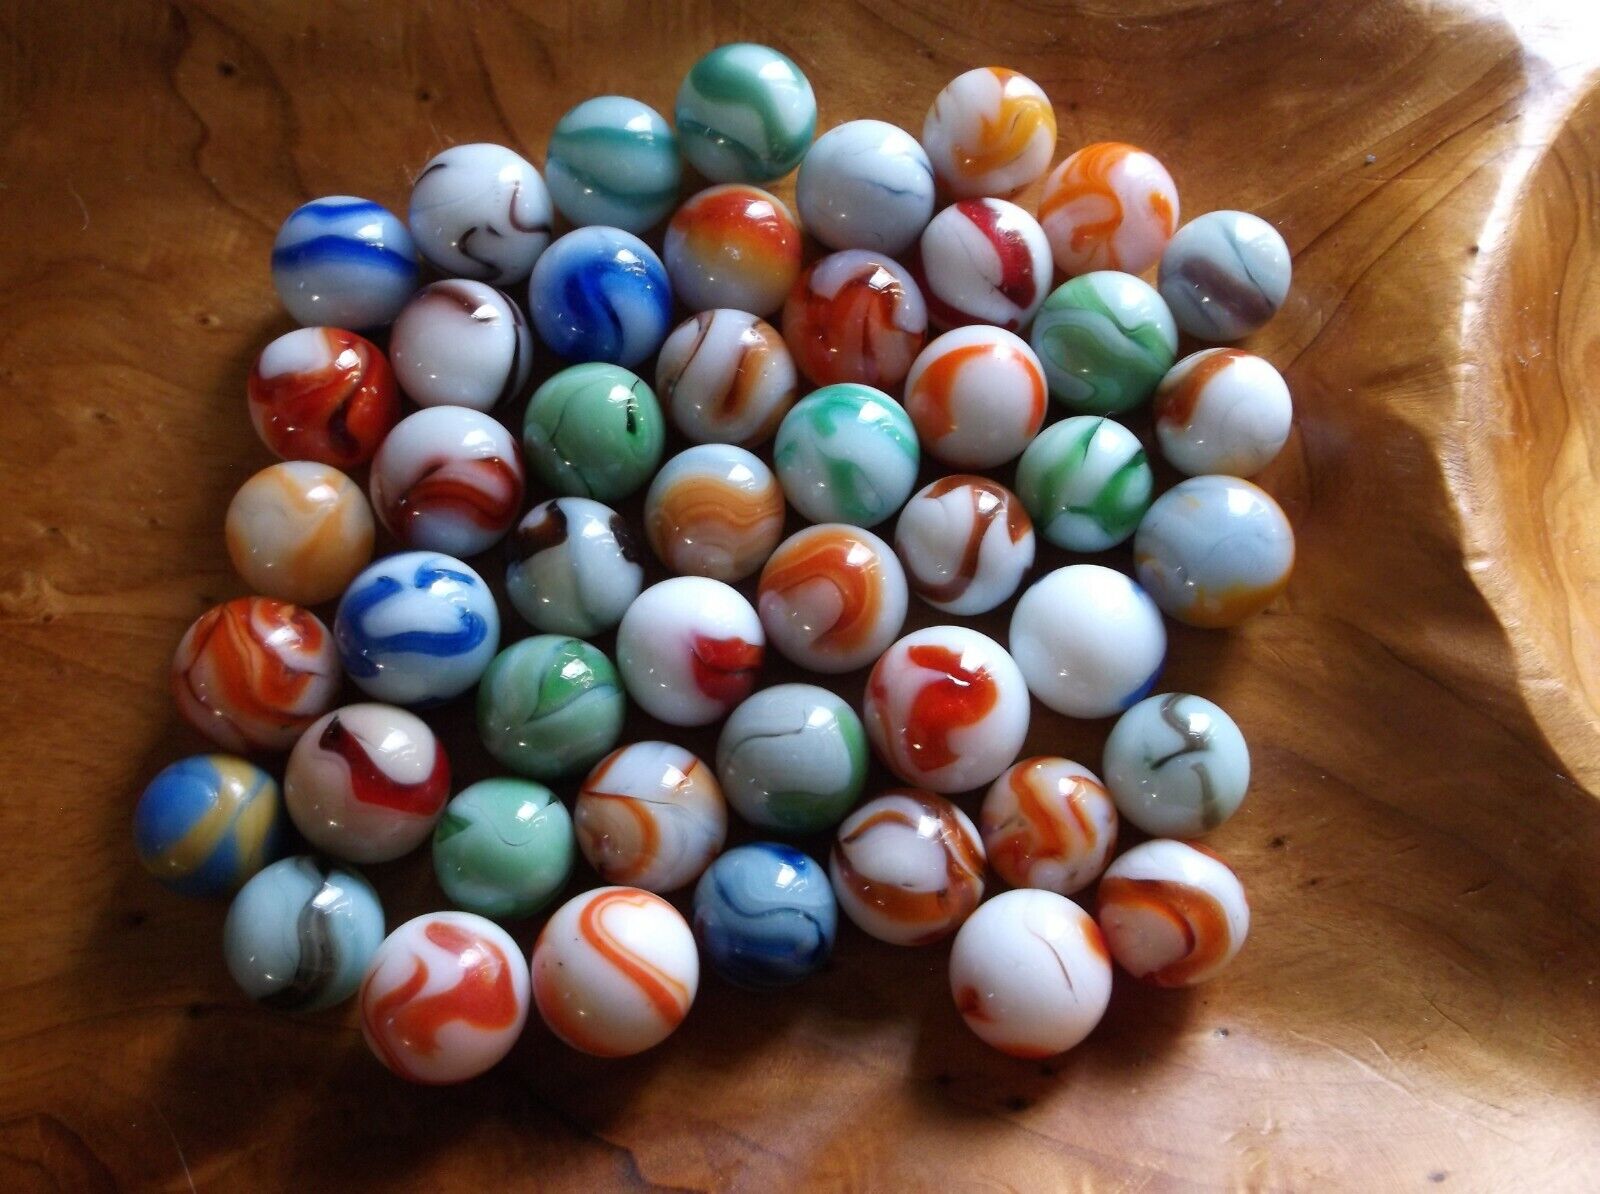 50+ COLLECTABLE ALLEY AGATE///RAVENSWOOD AN HEATON SWIRL MARBLES MIXED GROUP